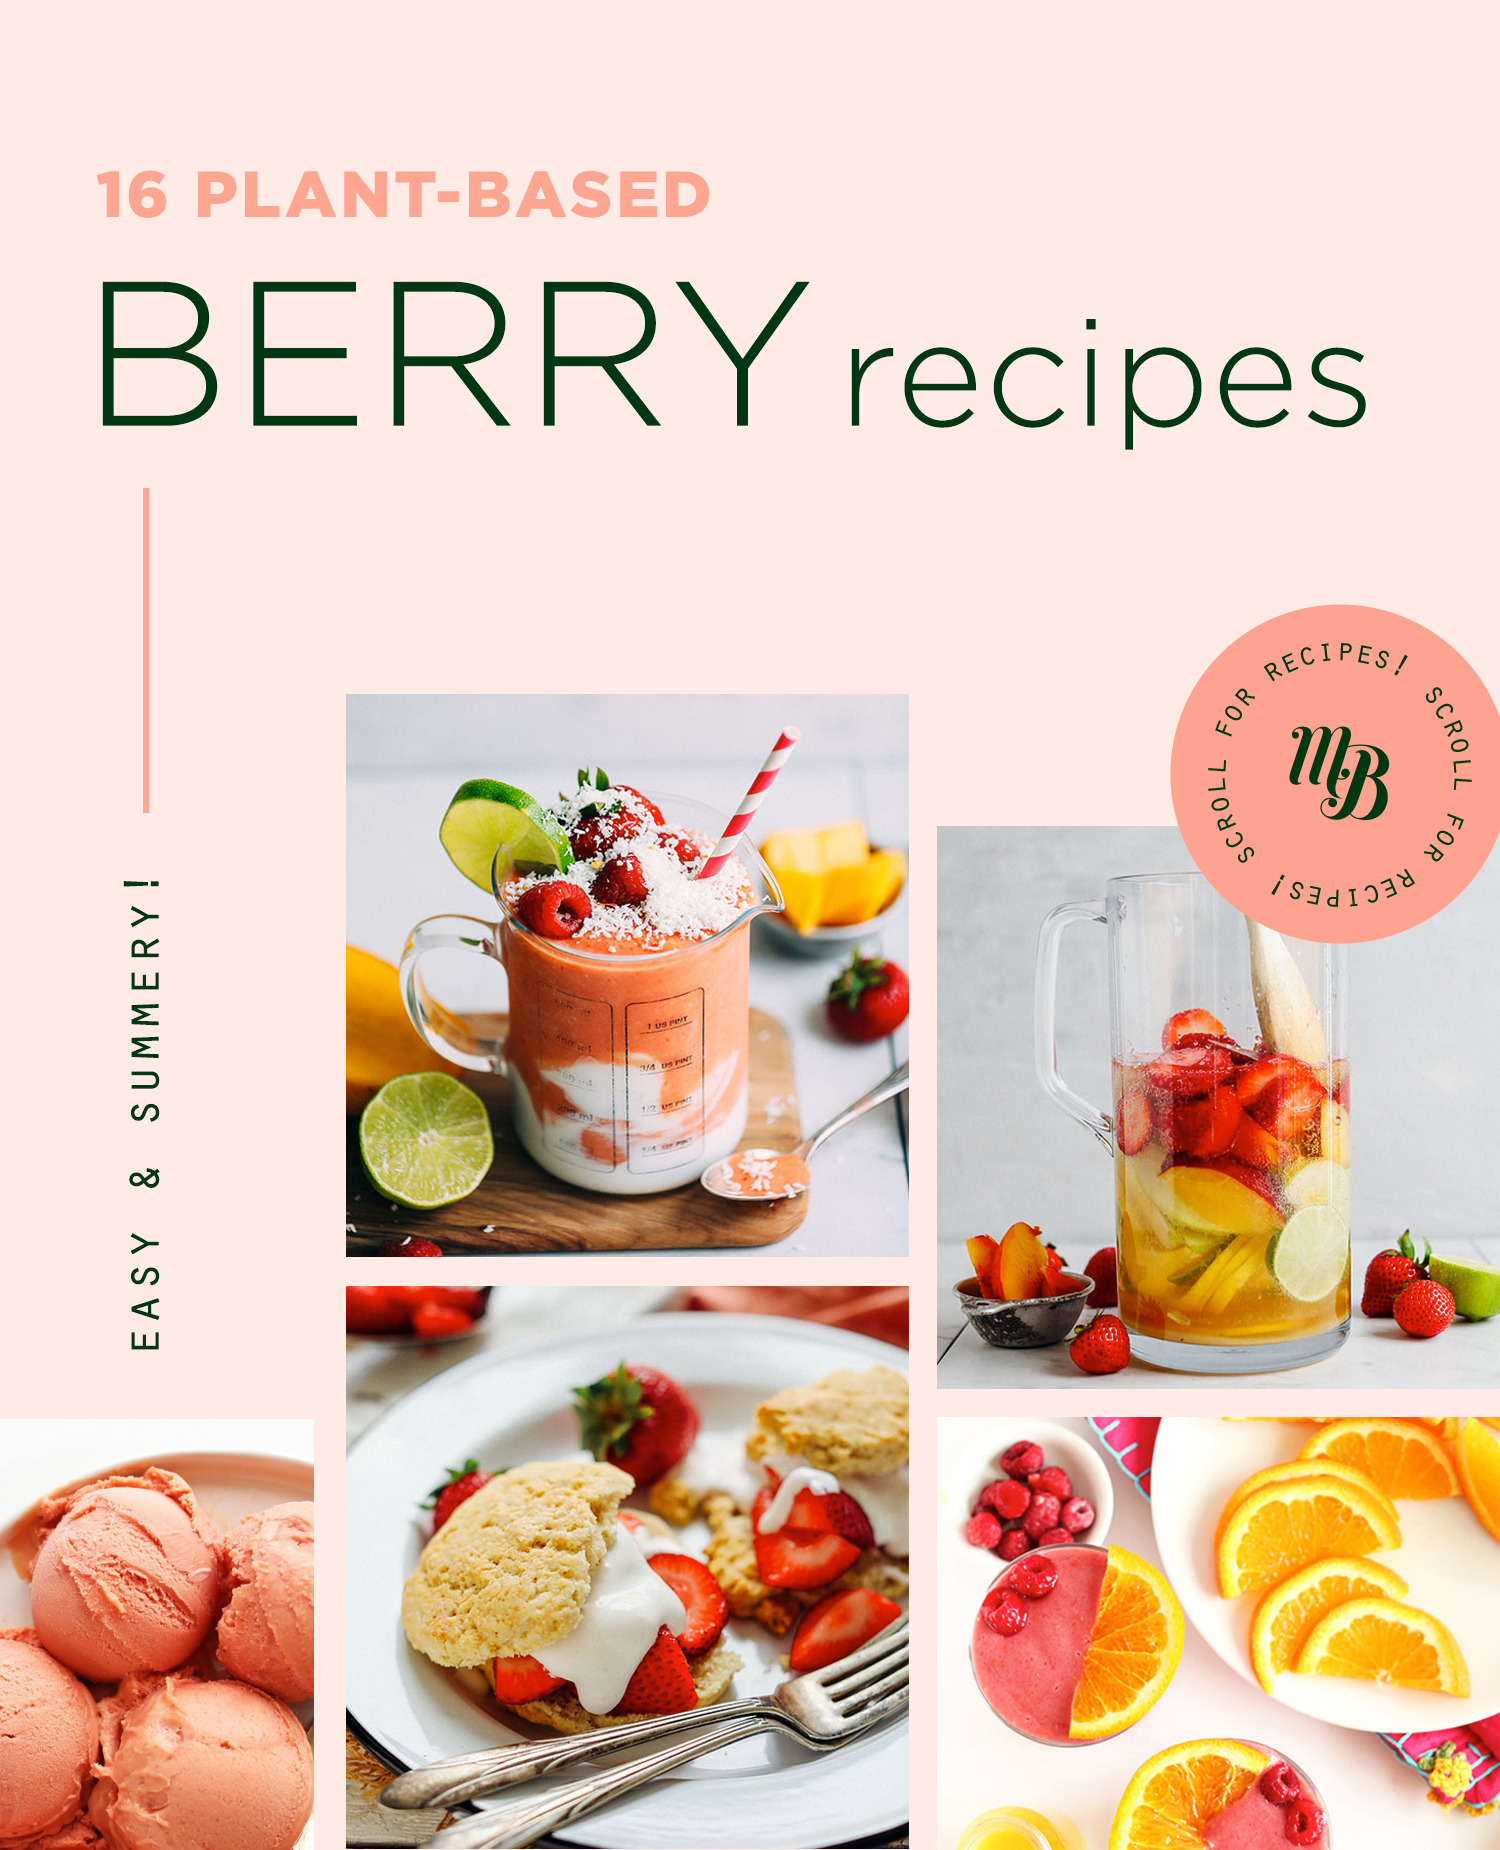 Smoothie, sangria, and other berry recipes